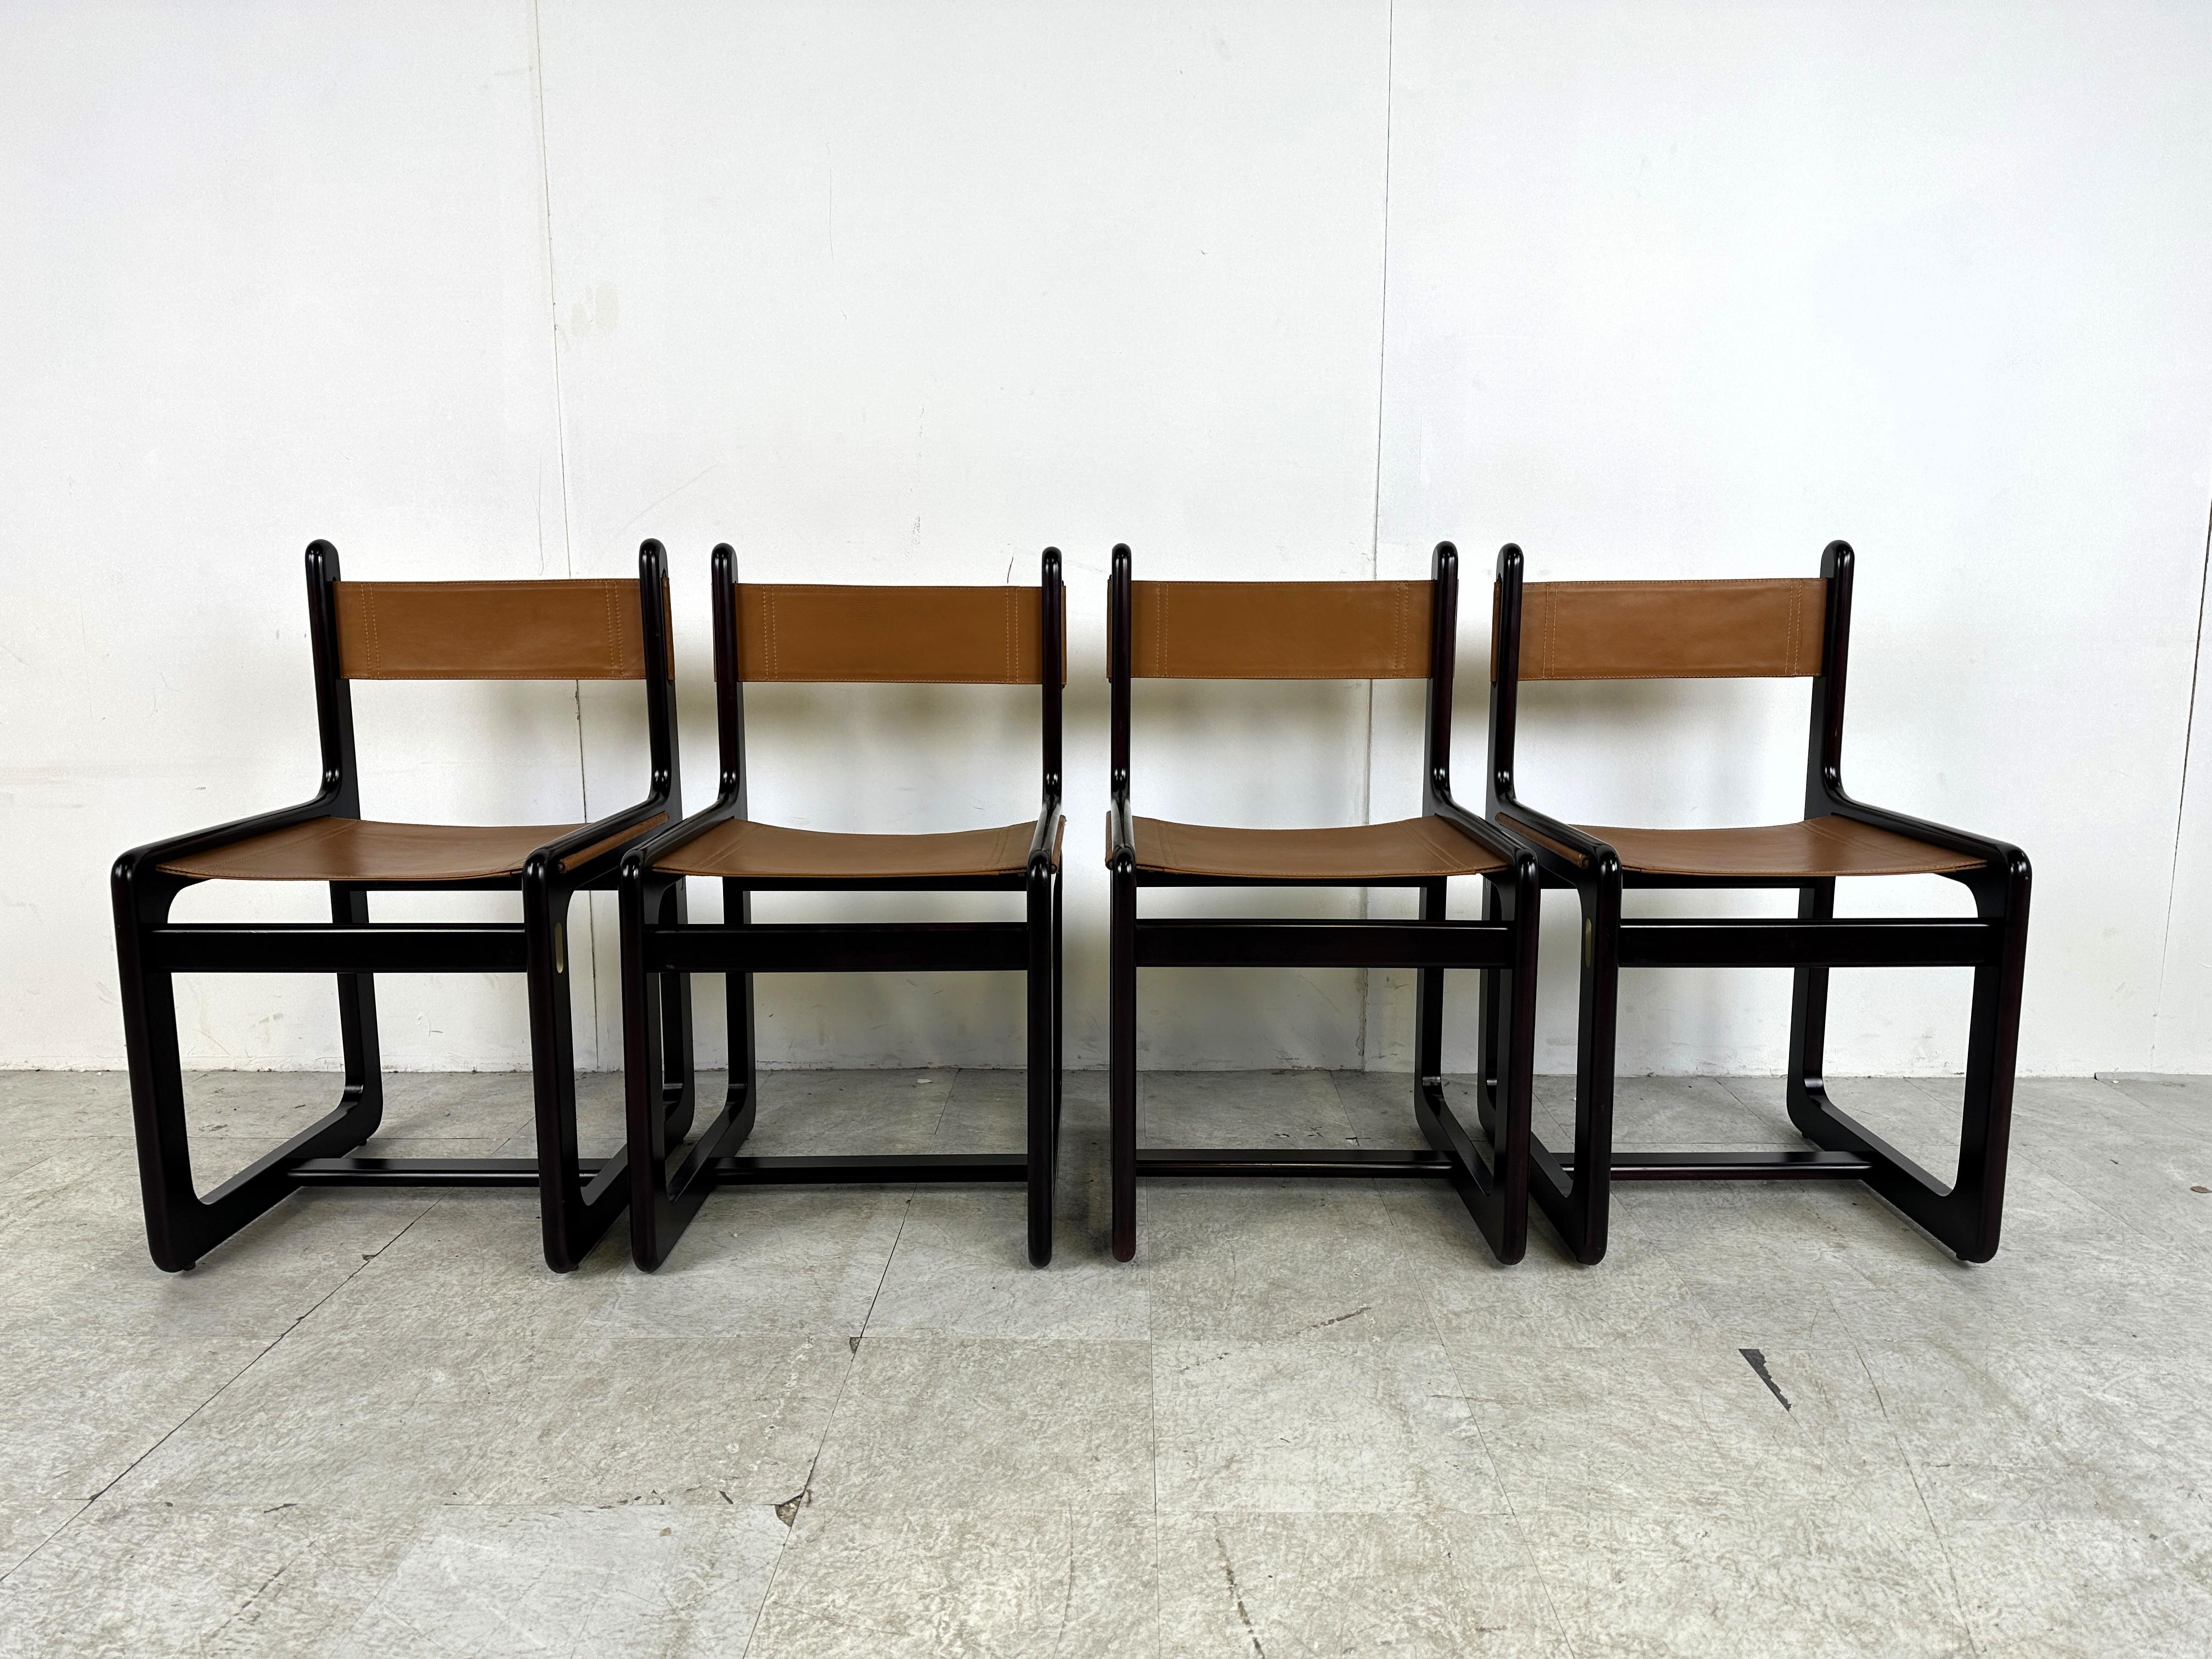 Mid century Nautical style dining chairs designed by Gigi Radice and Pierangelo Gallotti.

The chairs have a beautiful rosewood frame with brass details and sling leather seats and backrests.

Very good condition. 

Dimensions:
Height: